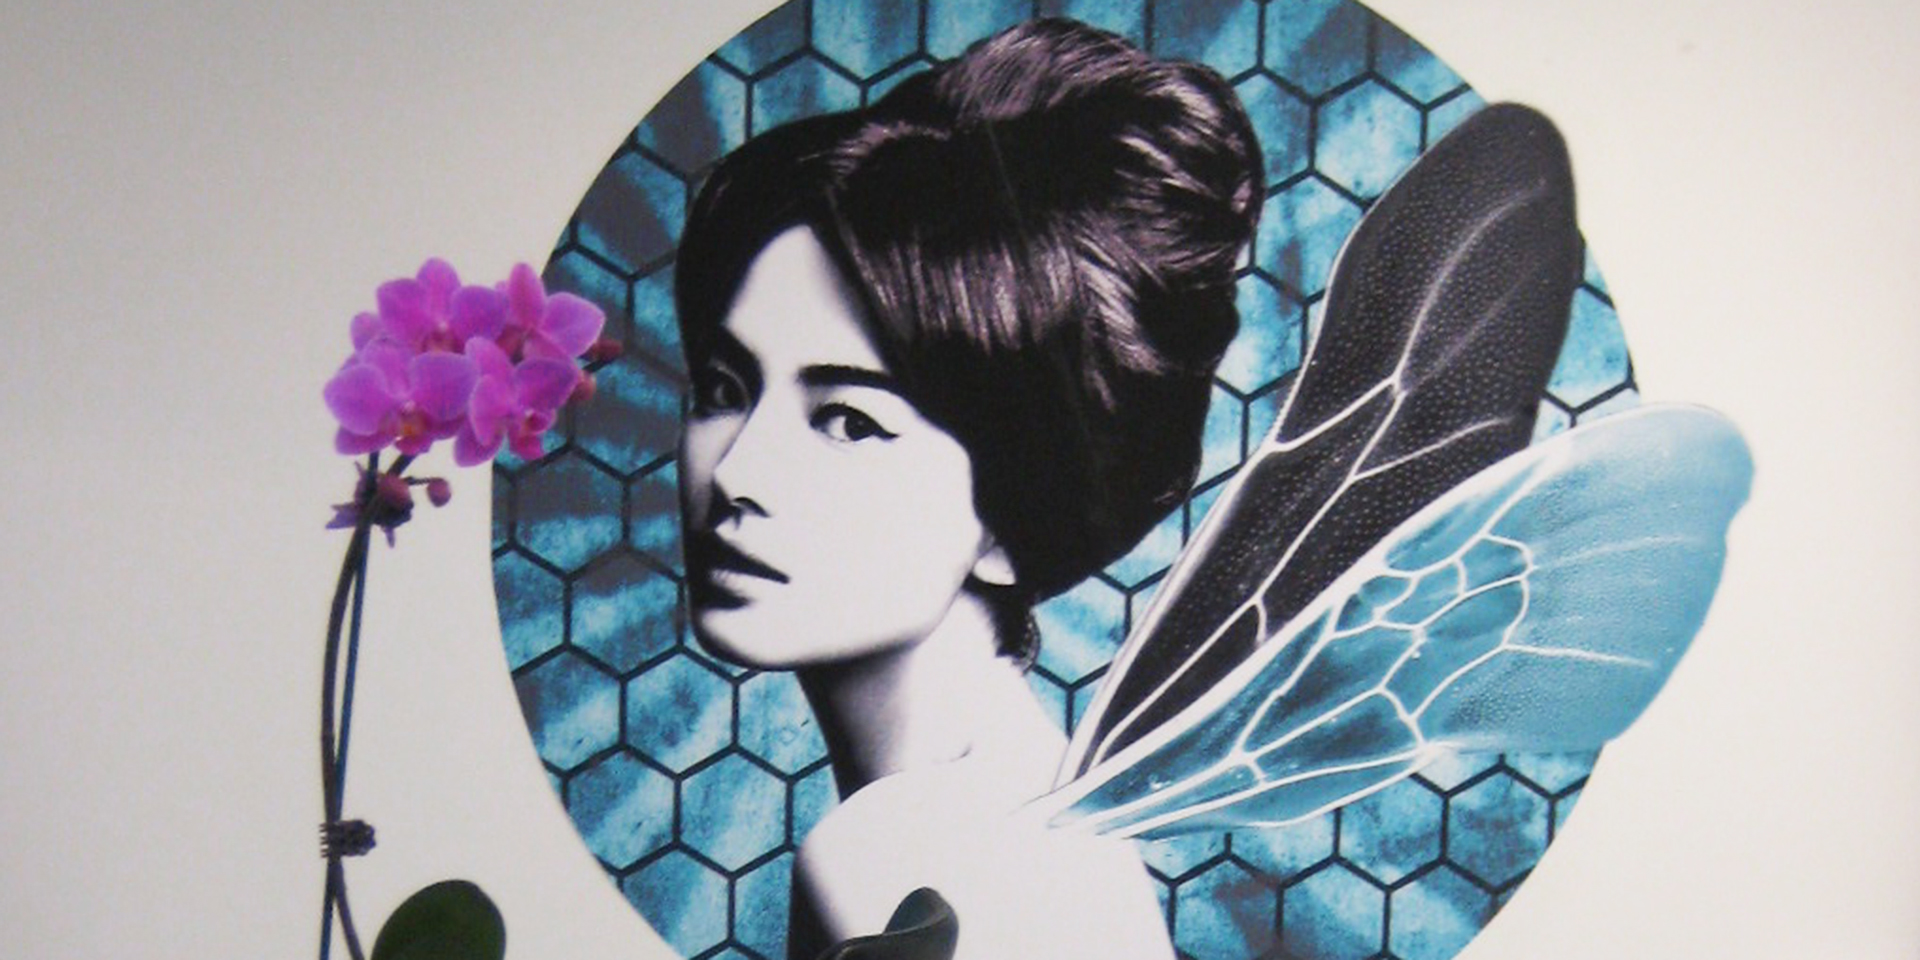 Beehive Salon Edinburgh Wall art of model with a beehive hairstyle and insect wings protruding from back